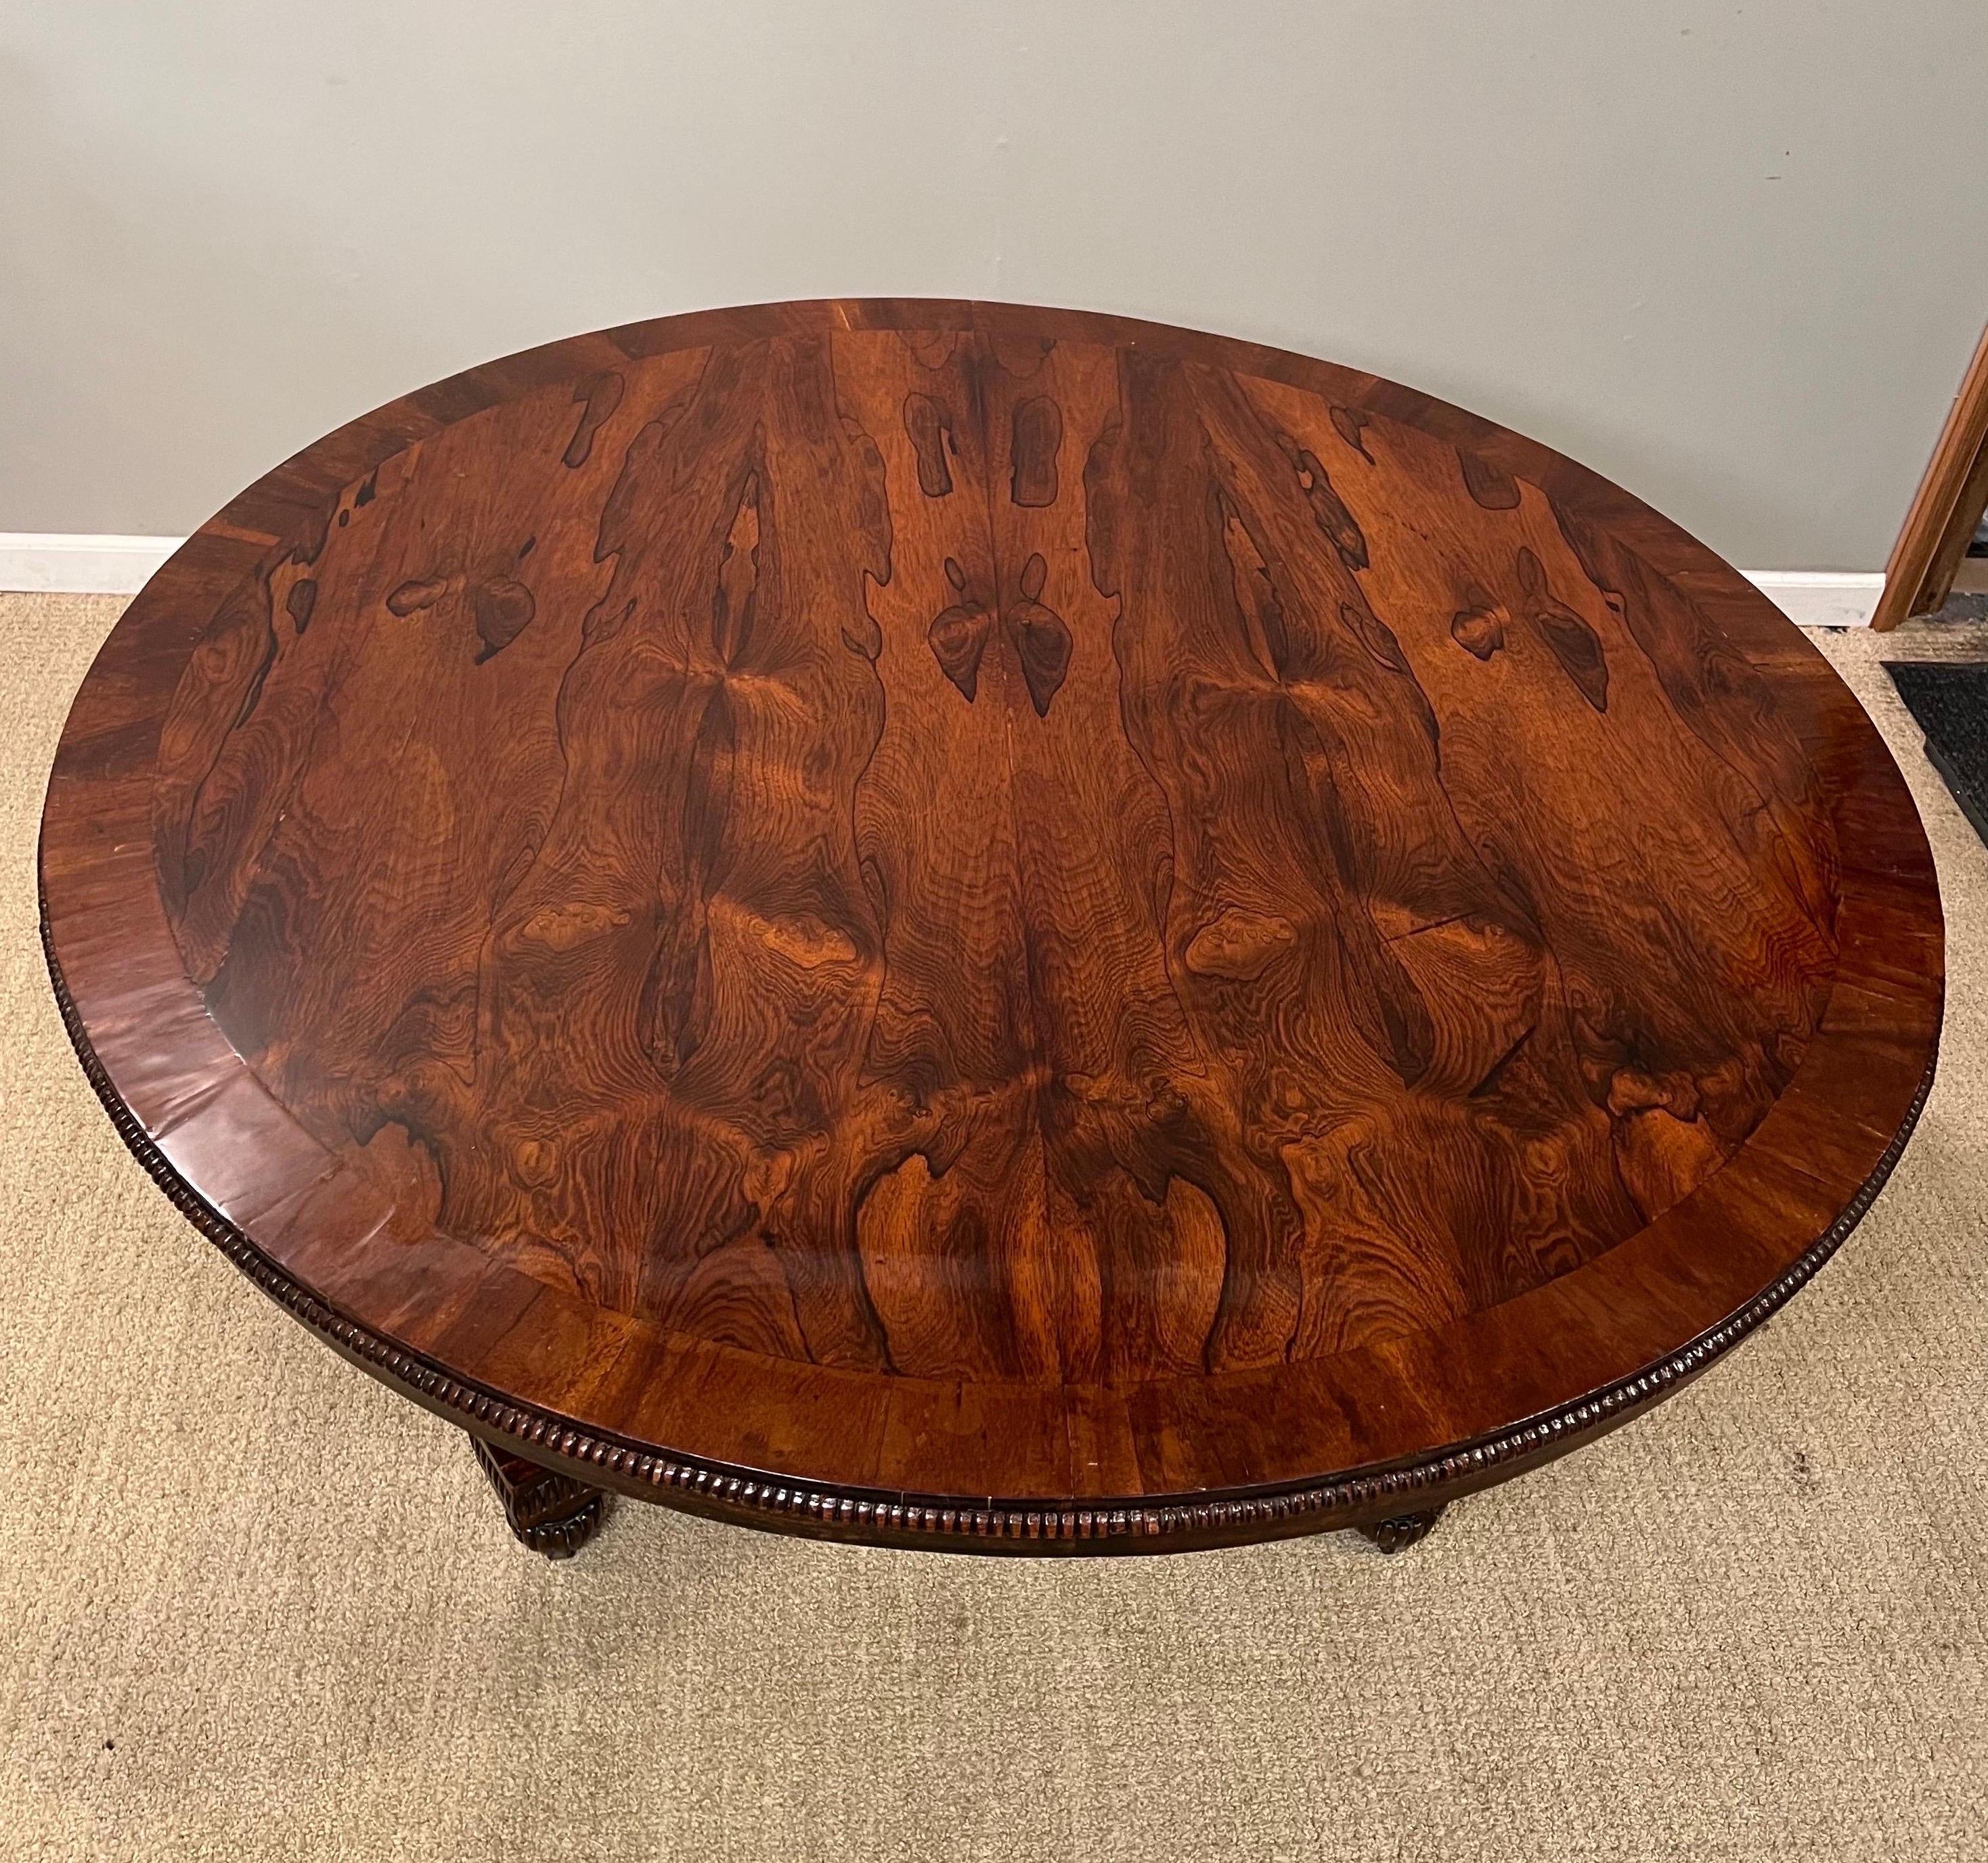 Regency Rosewood tilt-top center table.
Extraordinary rosewood grain & patina.
Table has been professionally tightened & polished.
It's in ready to use (retail) condition.